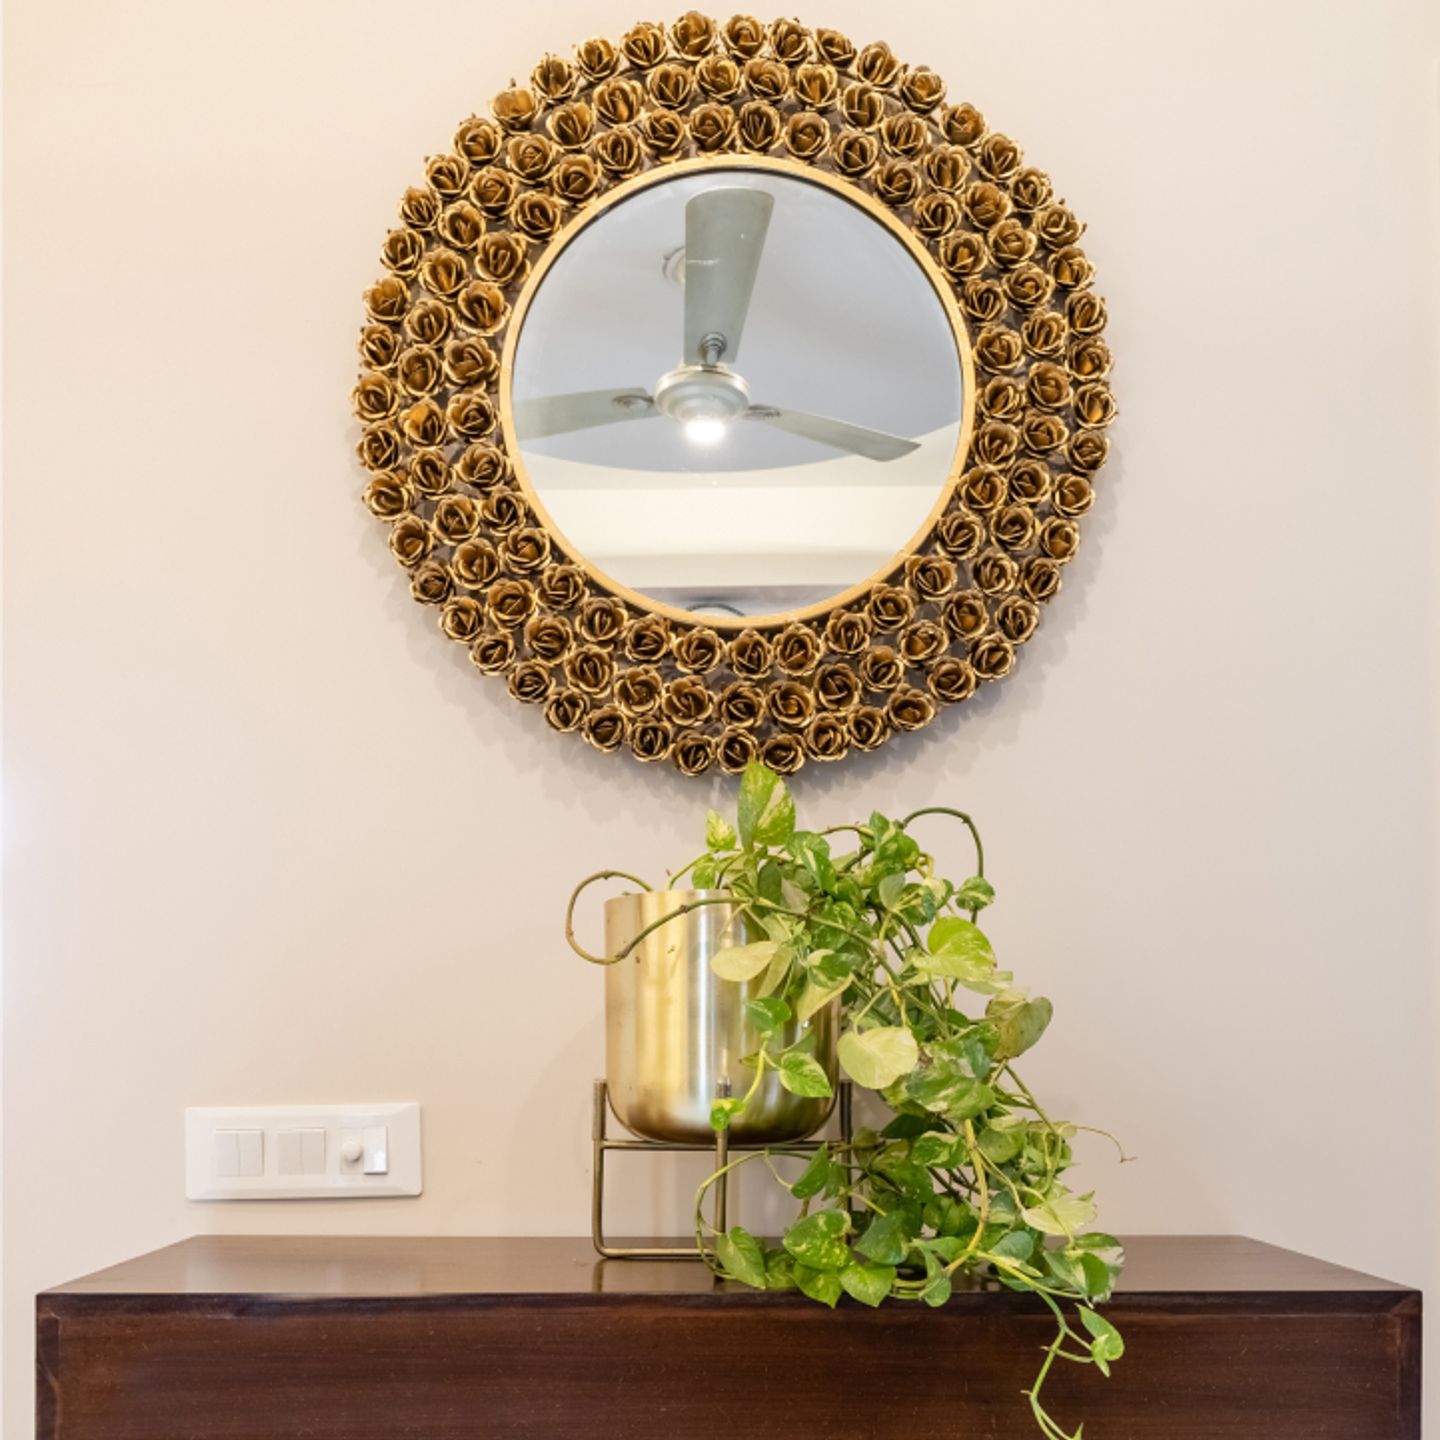 Durable Light Beige Wall Paint Design With a Mirror - Livspace